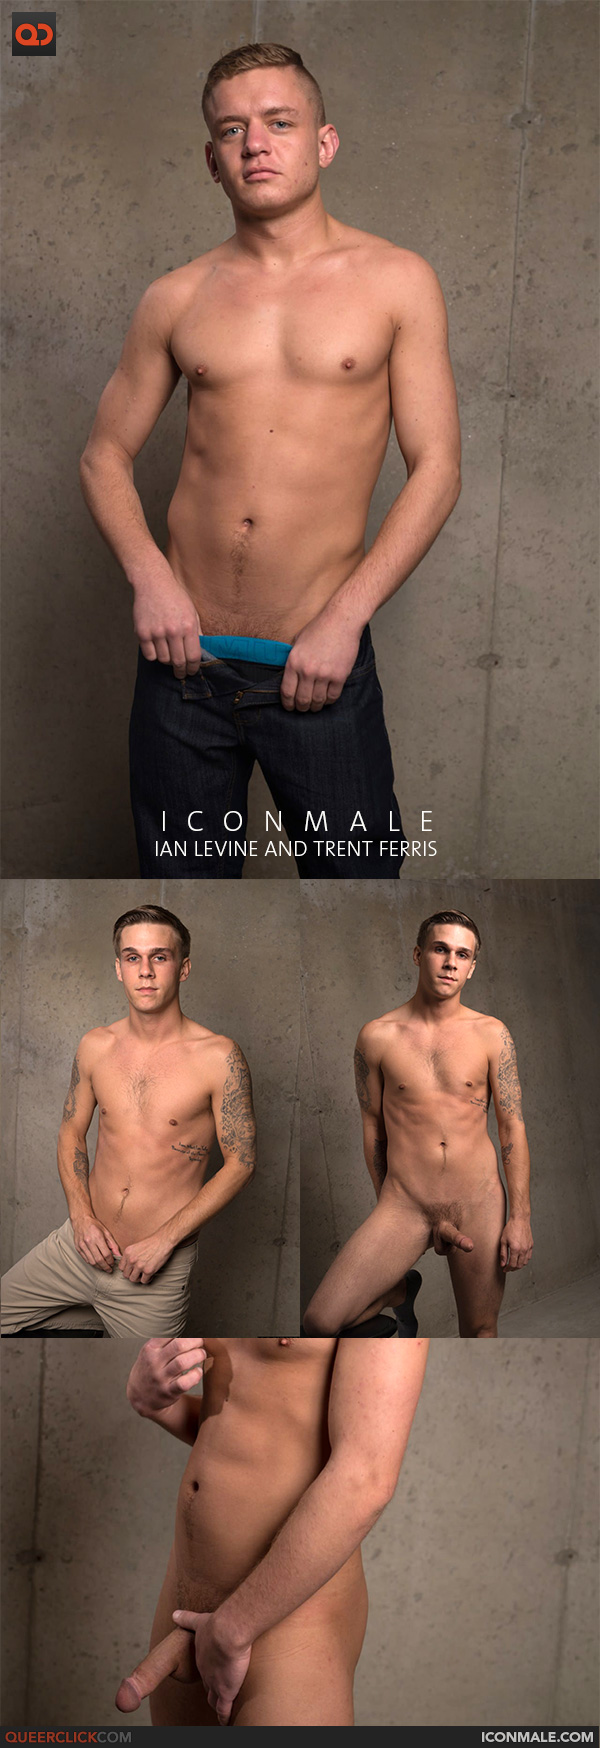 IconMale: Ian Levine and Trent Ferris